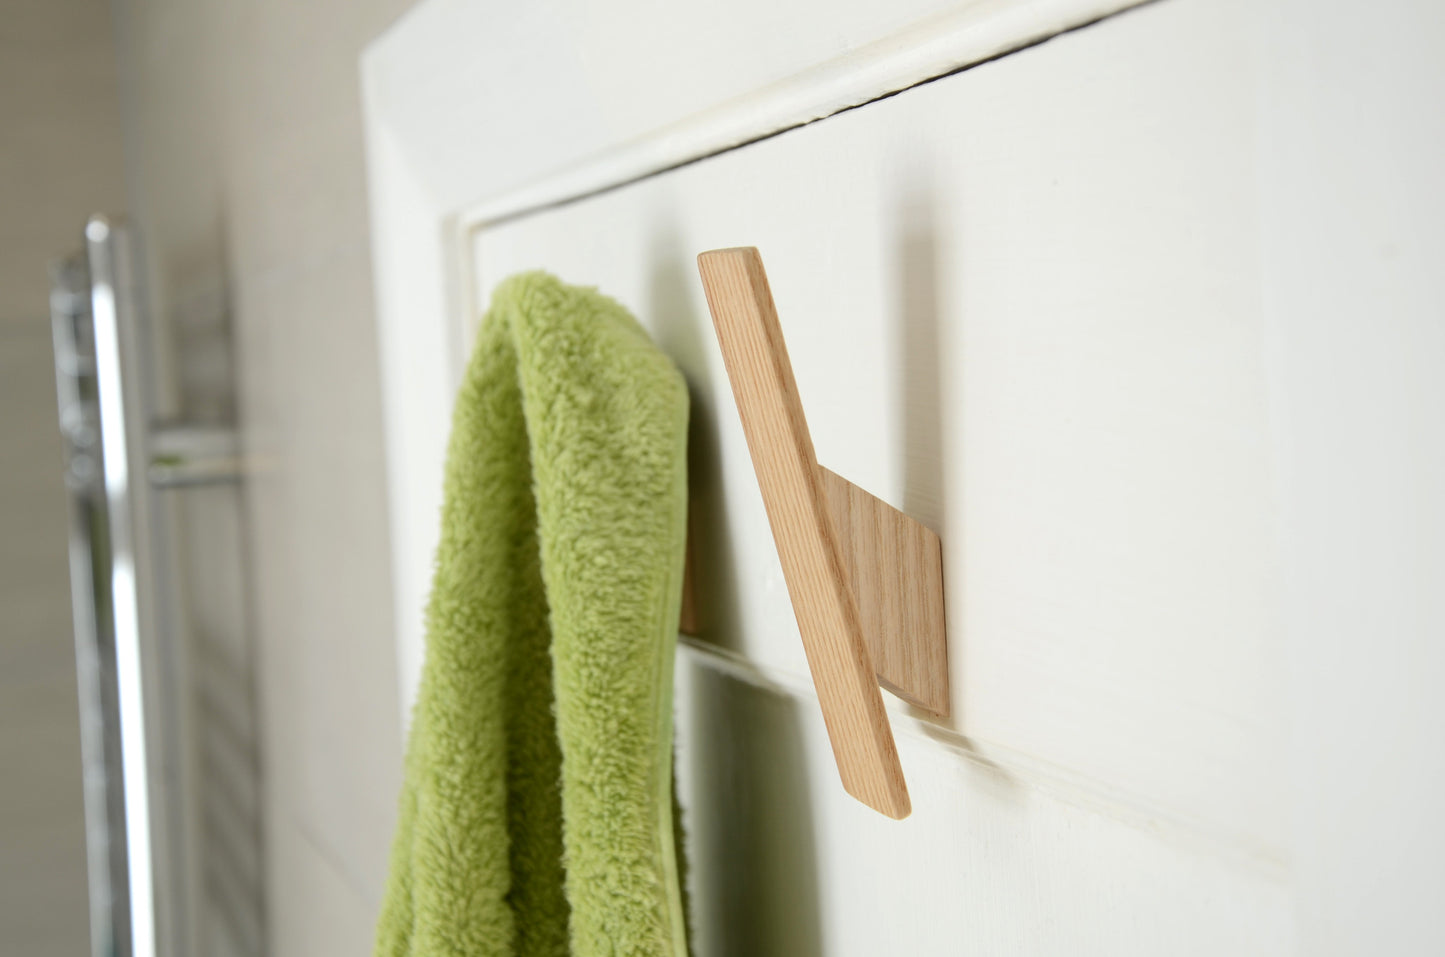 simple wooden wall hook made from ash in a bathroom with towel